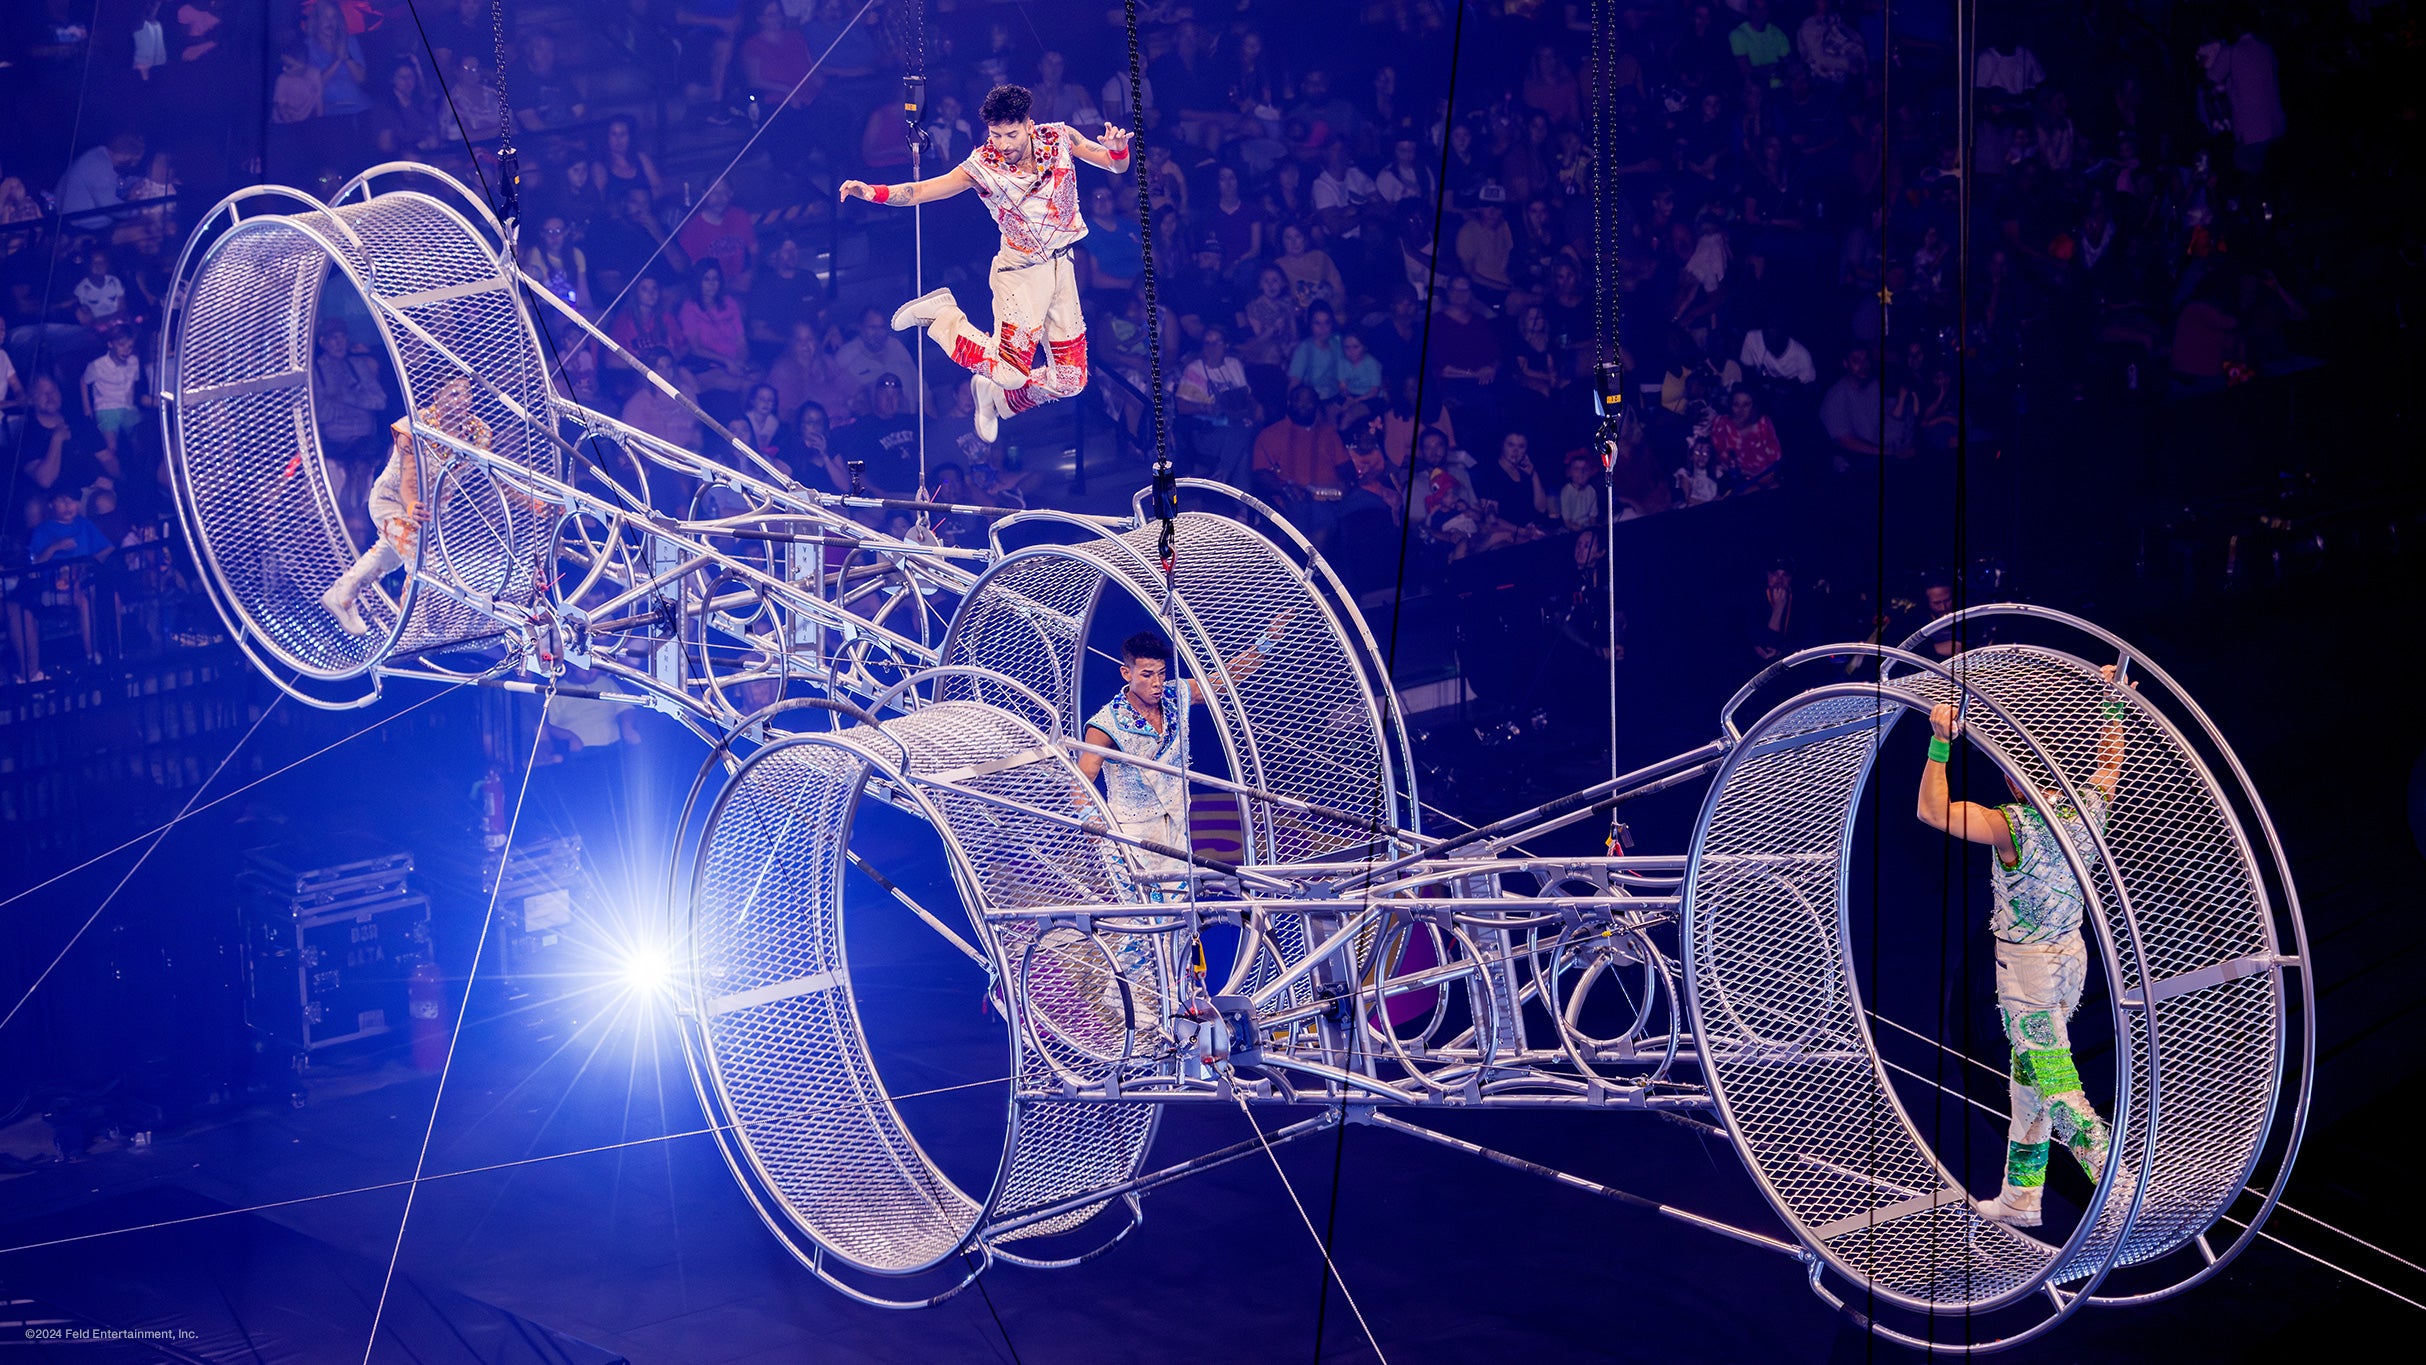 Ringling Bros. and Barnum & Bailey presents The Greatest Show On Earth presales in Dallas